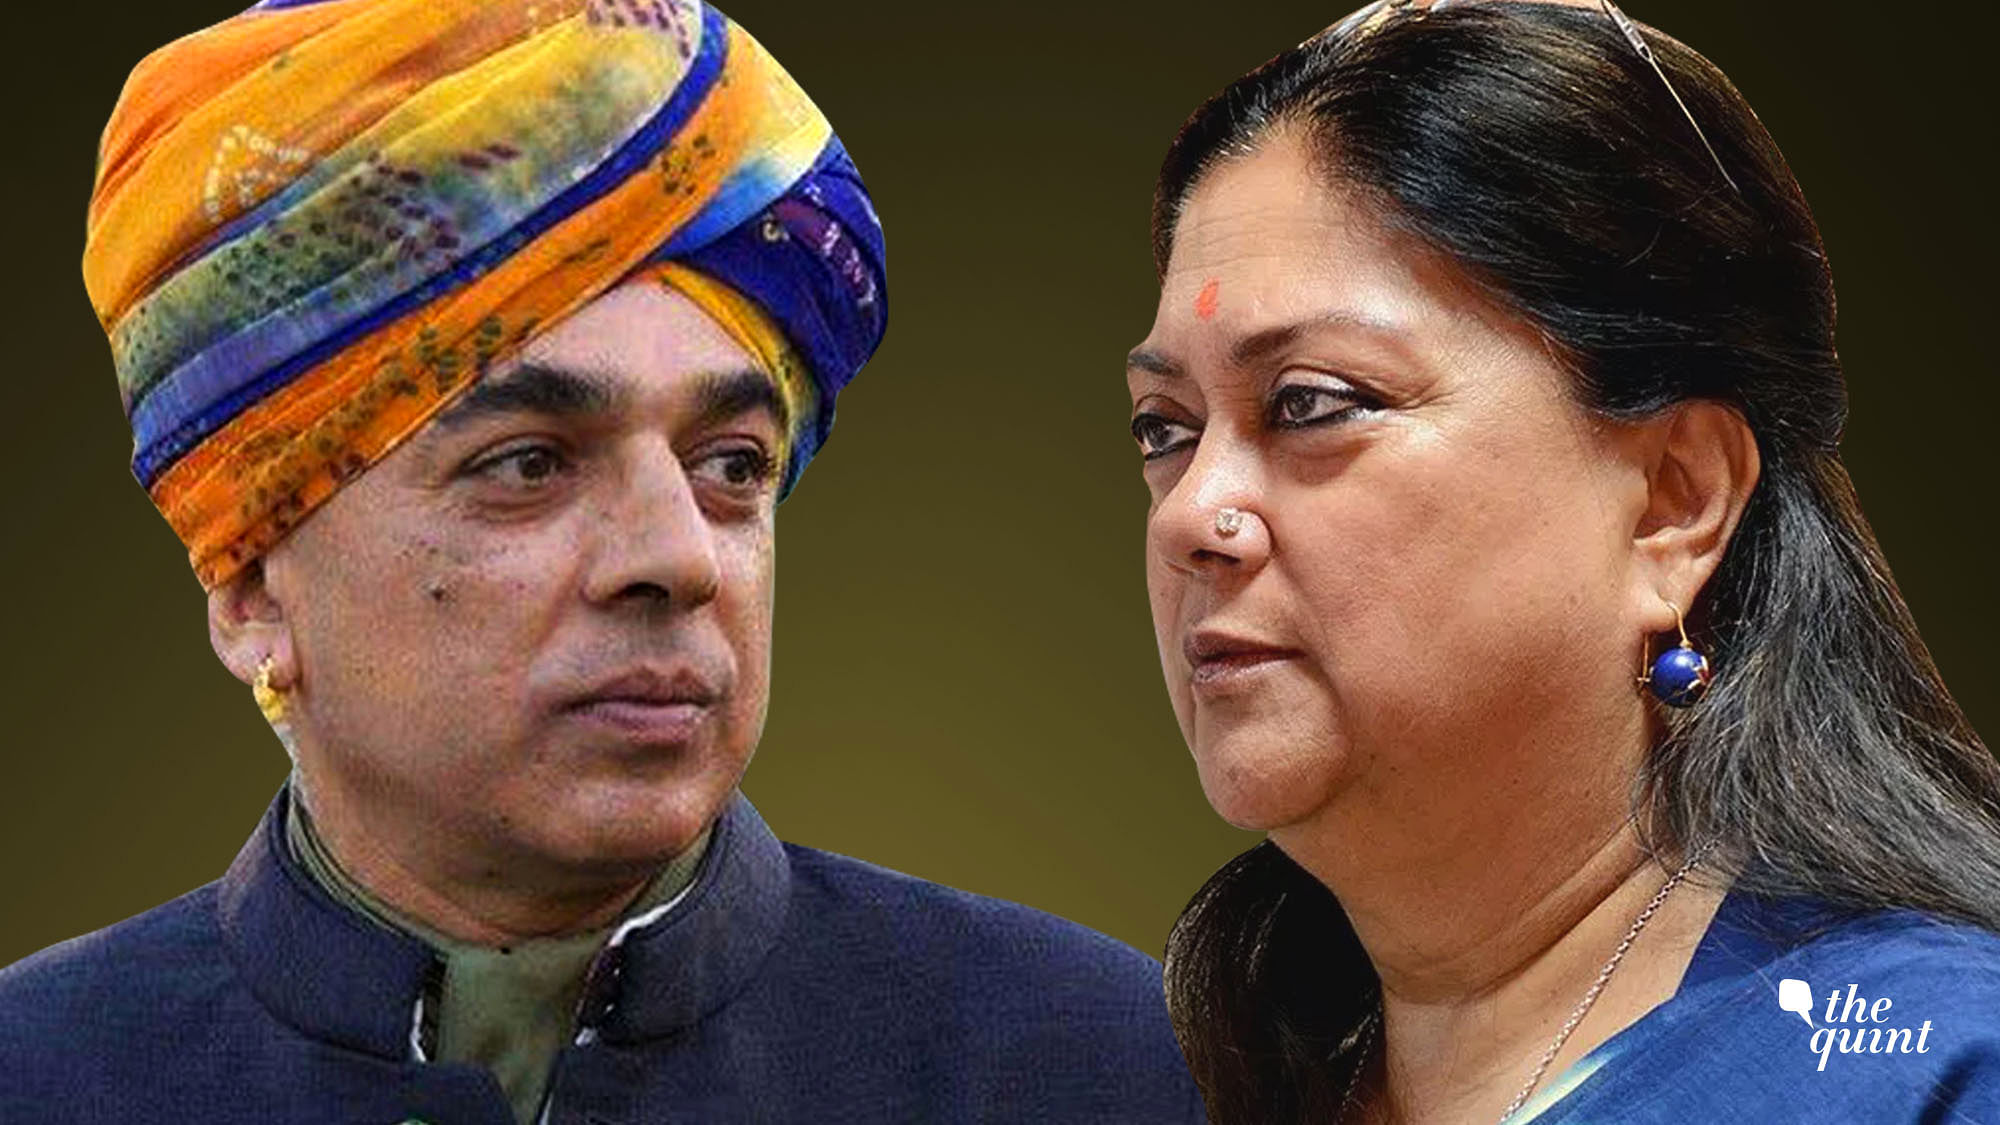 Congress’s Manvendra Singh will contest against Rajasthan CM Vasundhara Raje from Jhalrapatan in the upcoming Rajasthan assembly elections.